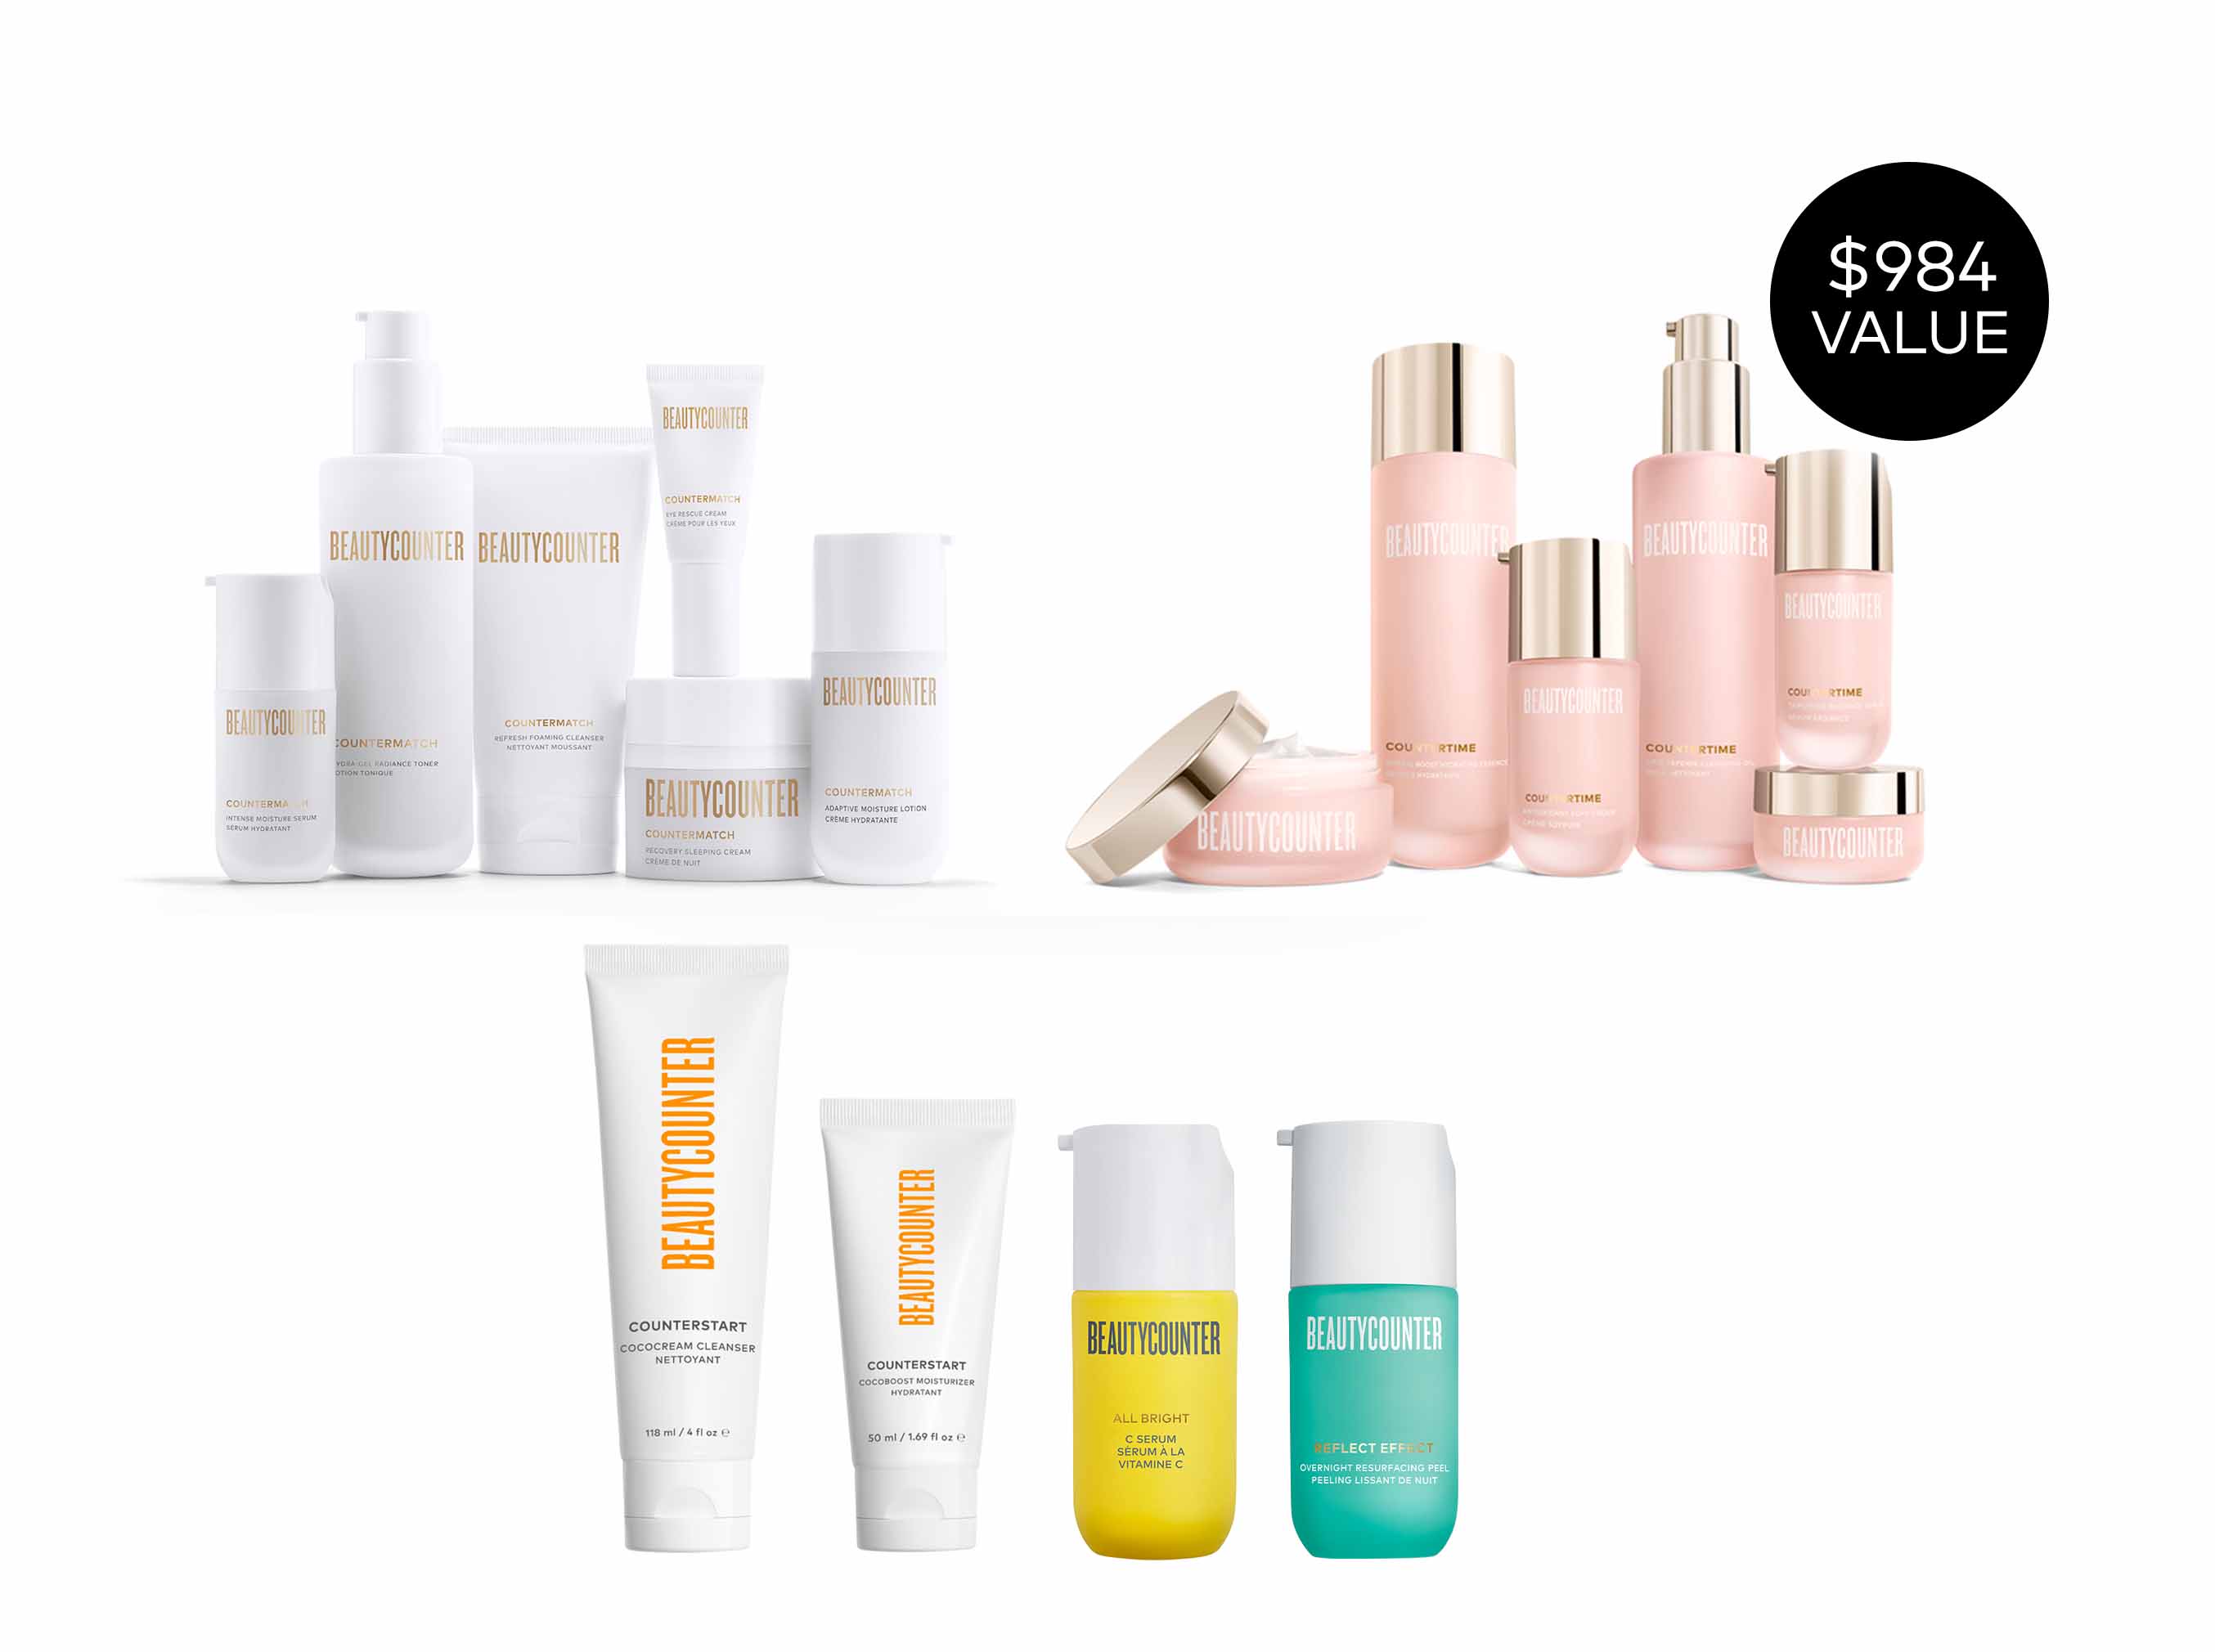 Best Sellers, Best-Selling Skin Care Products